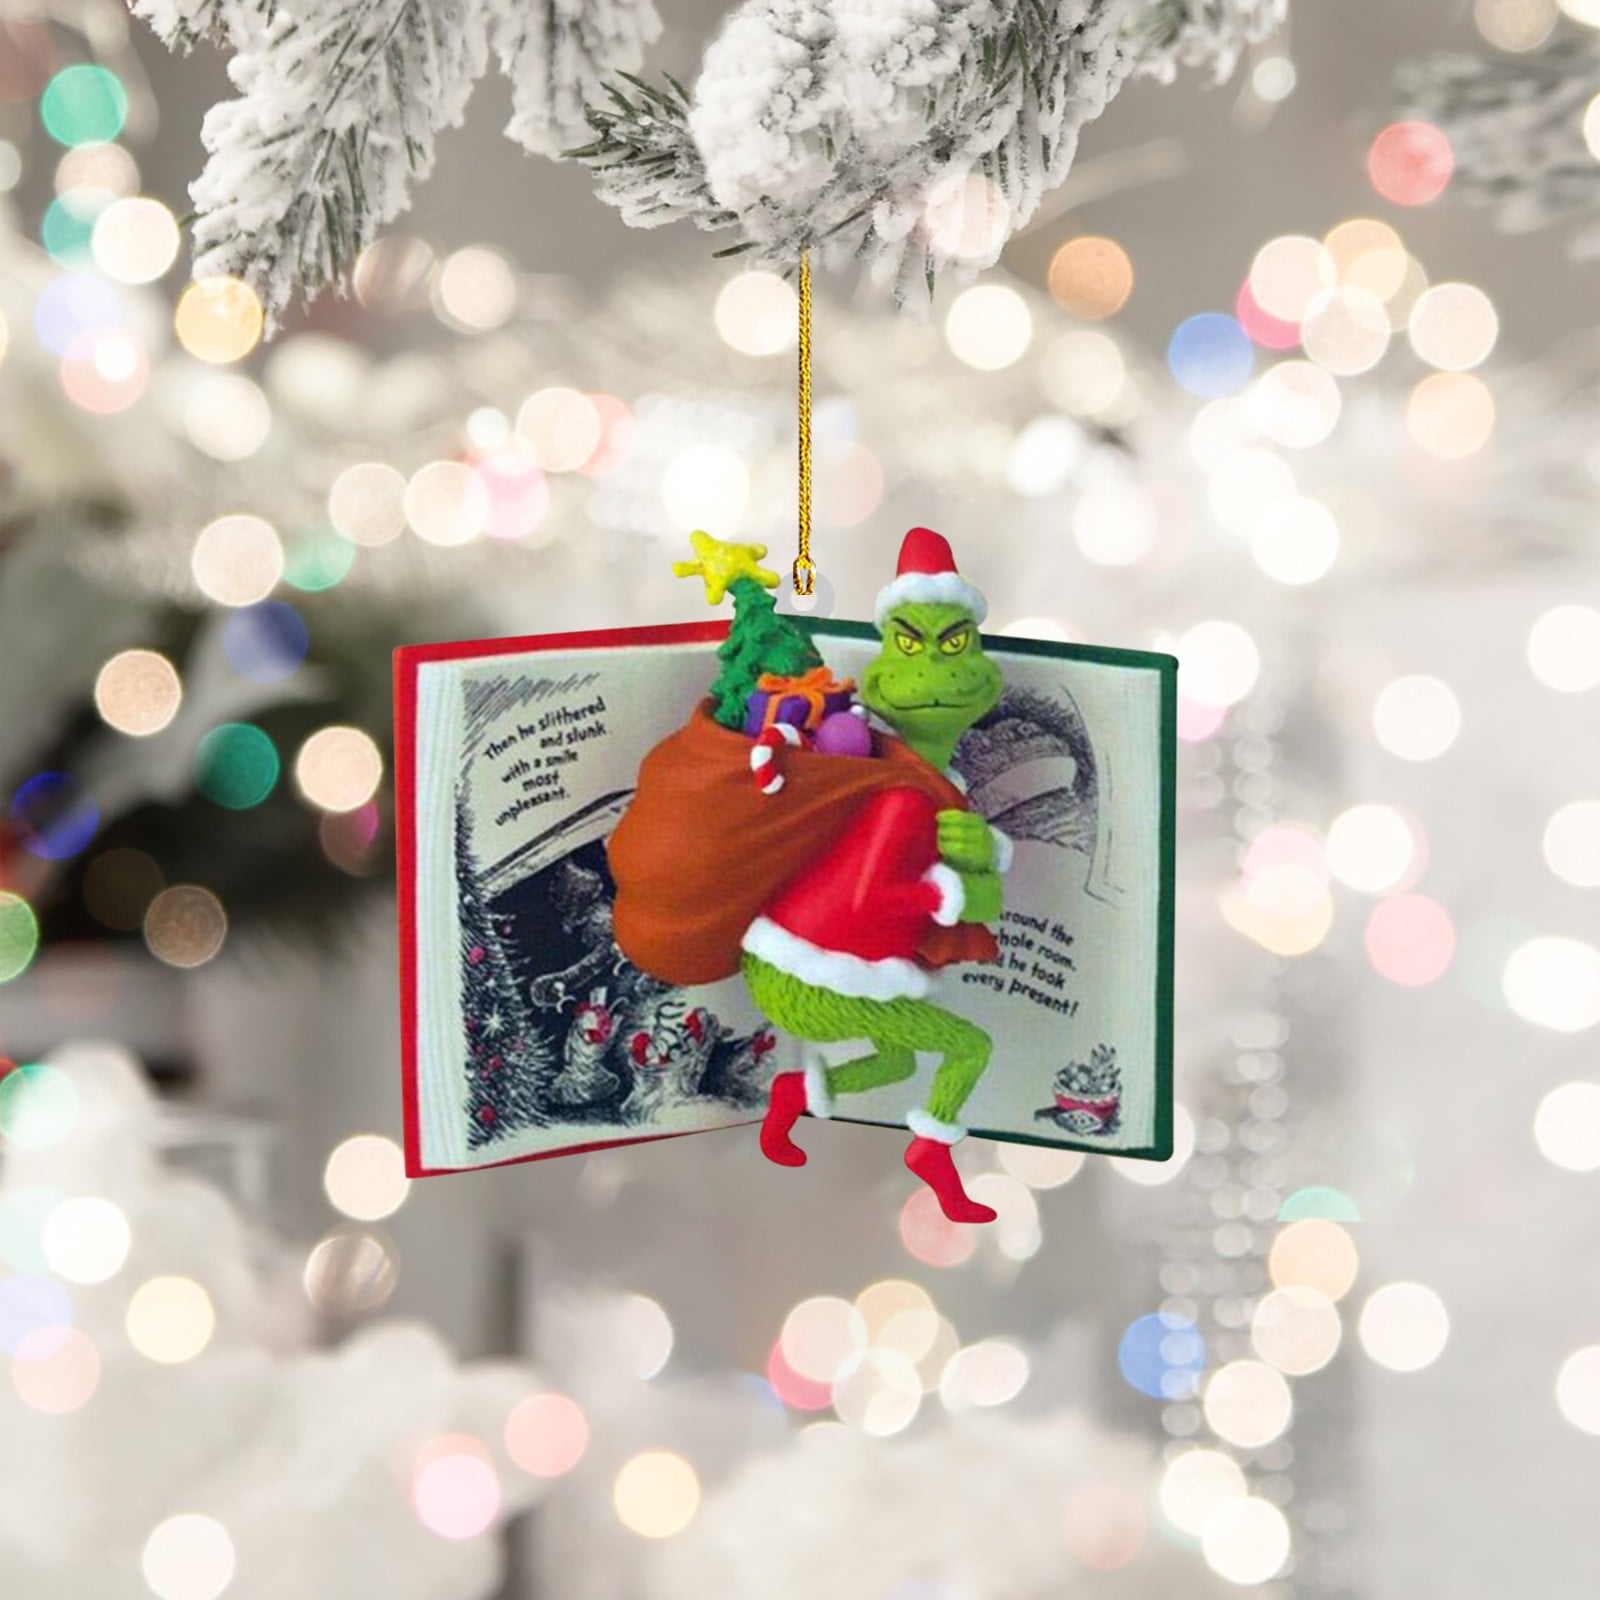 Christmas Decorations - the Grinch Christmas Decorations, Stole Acrylic  Pendant Tree Decoration, 1PC Decoration How The Stole with Present Ornament